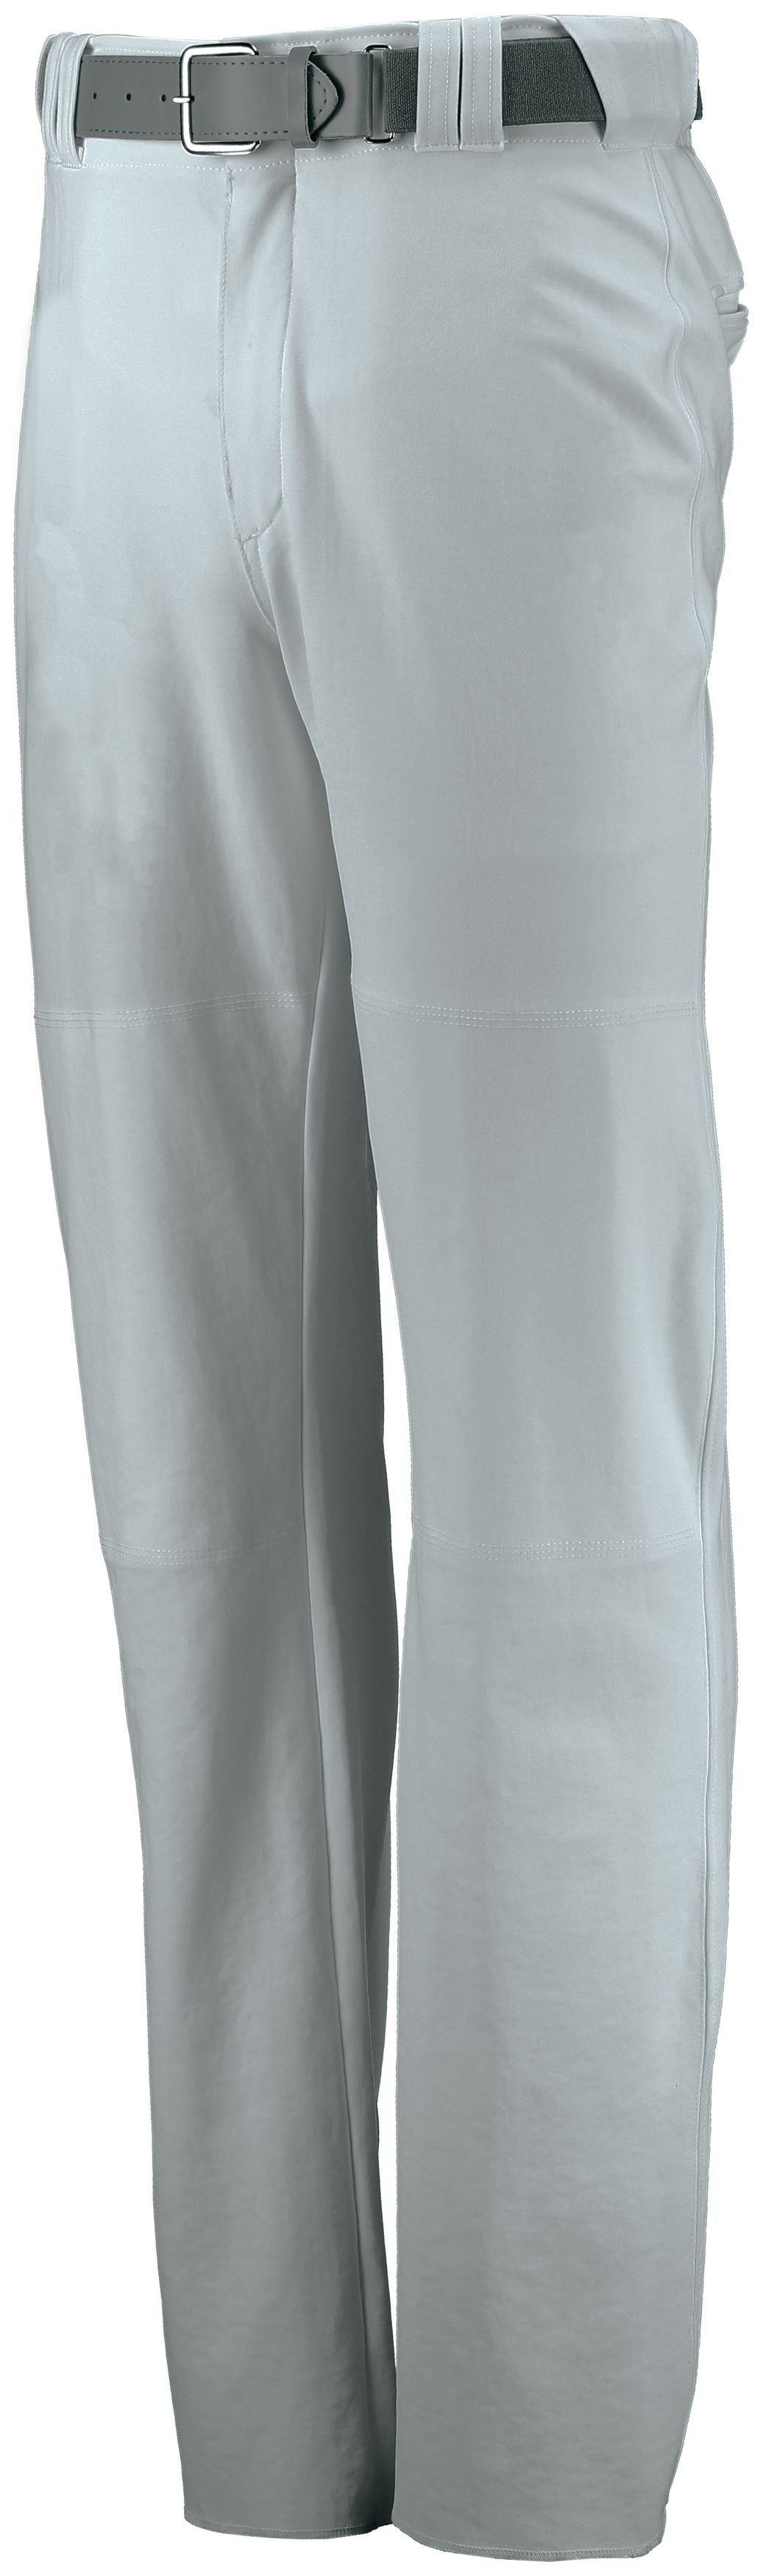 Russell Athletic Deluxe Relaxed Fit  Pant in Baseball Grey  -Part of the Adult, Adult-Pants, Pants, Baseball, Russell-Athletic-Products, All-Sports, All-Sports-1 product lines at KanaleyCreations.com